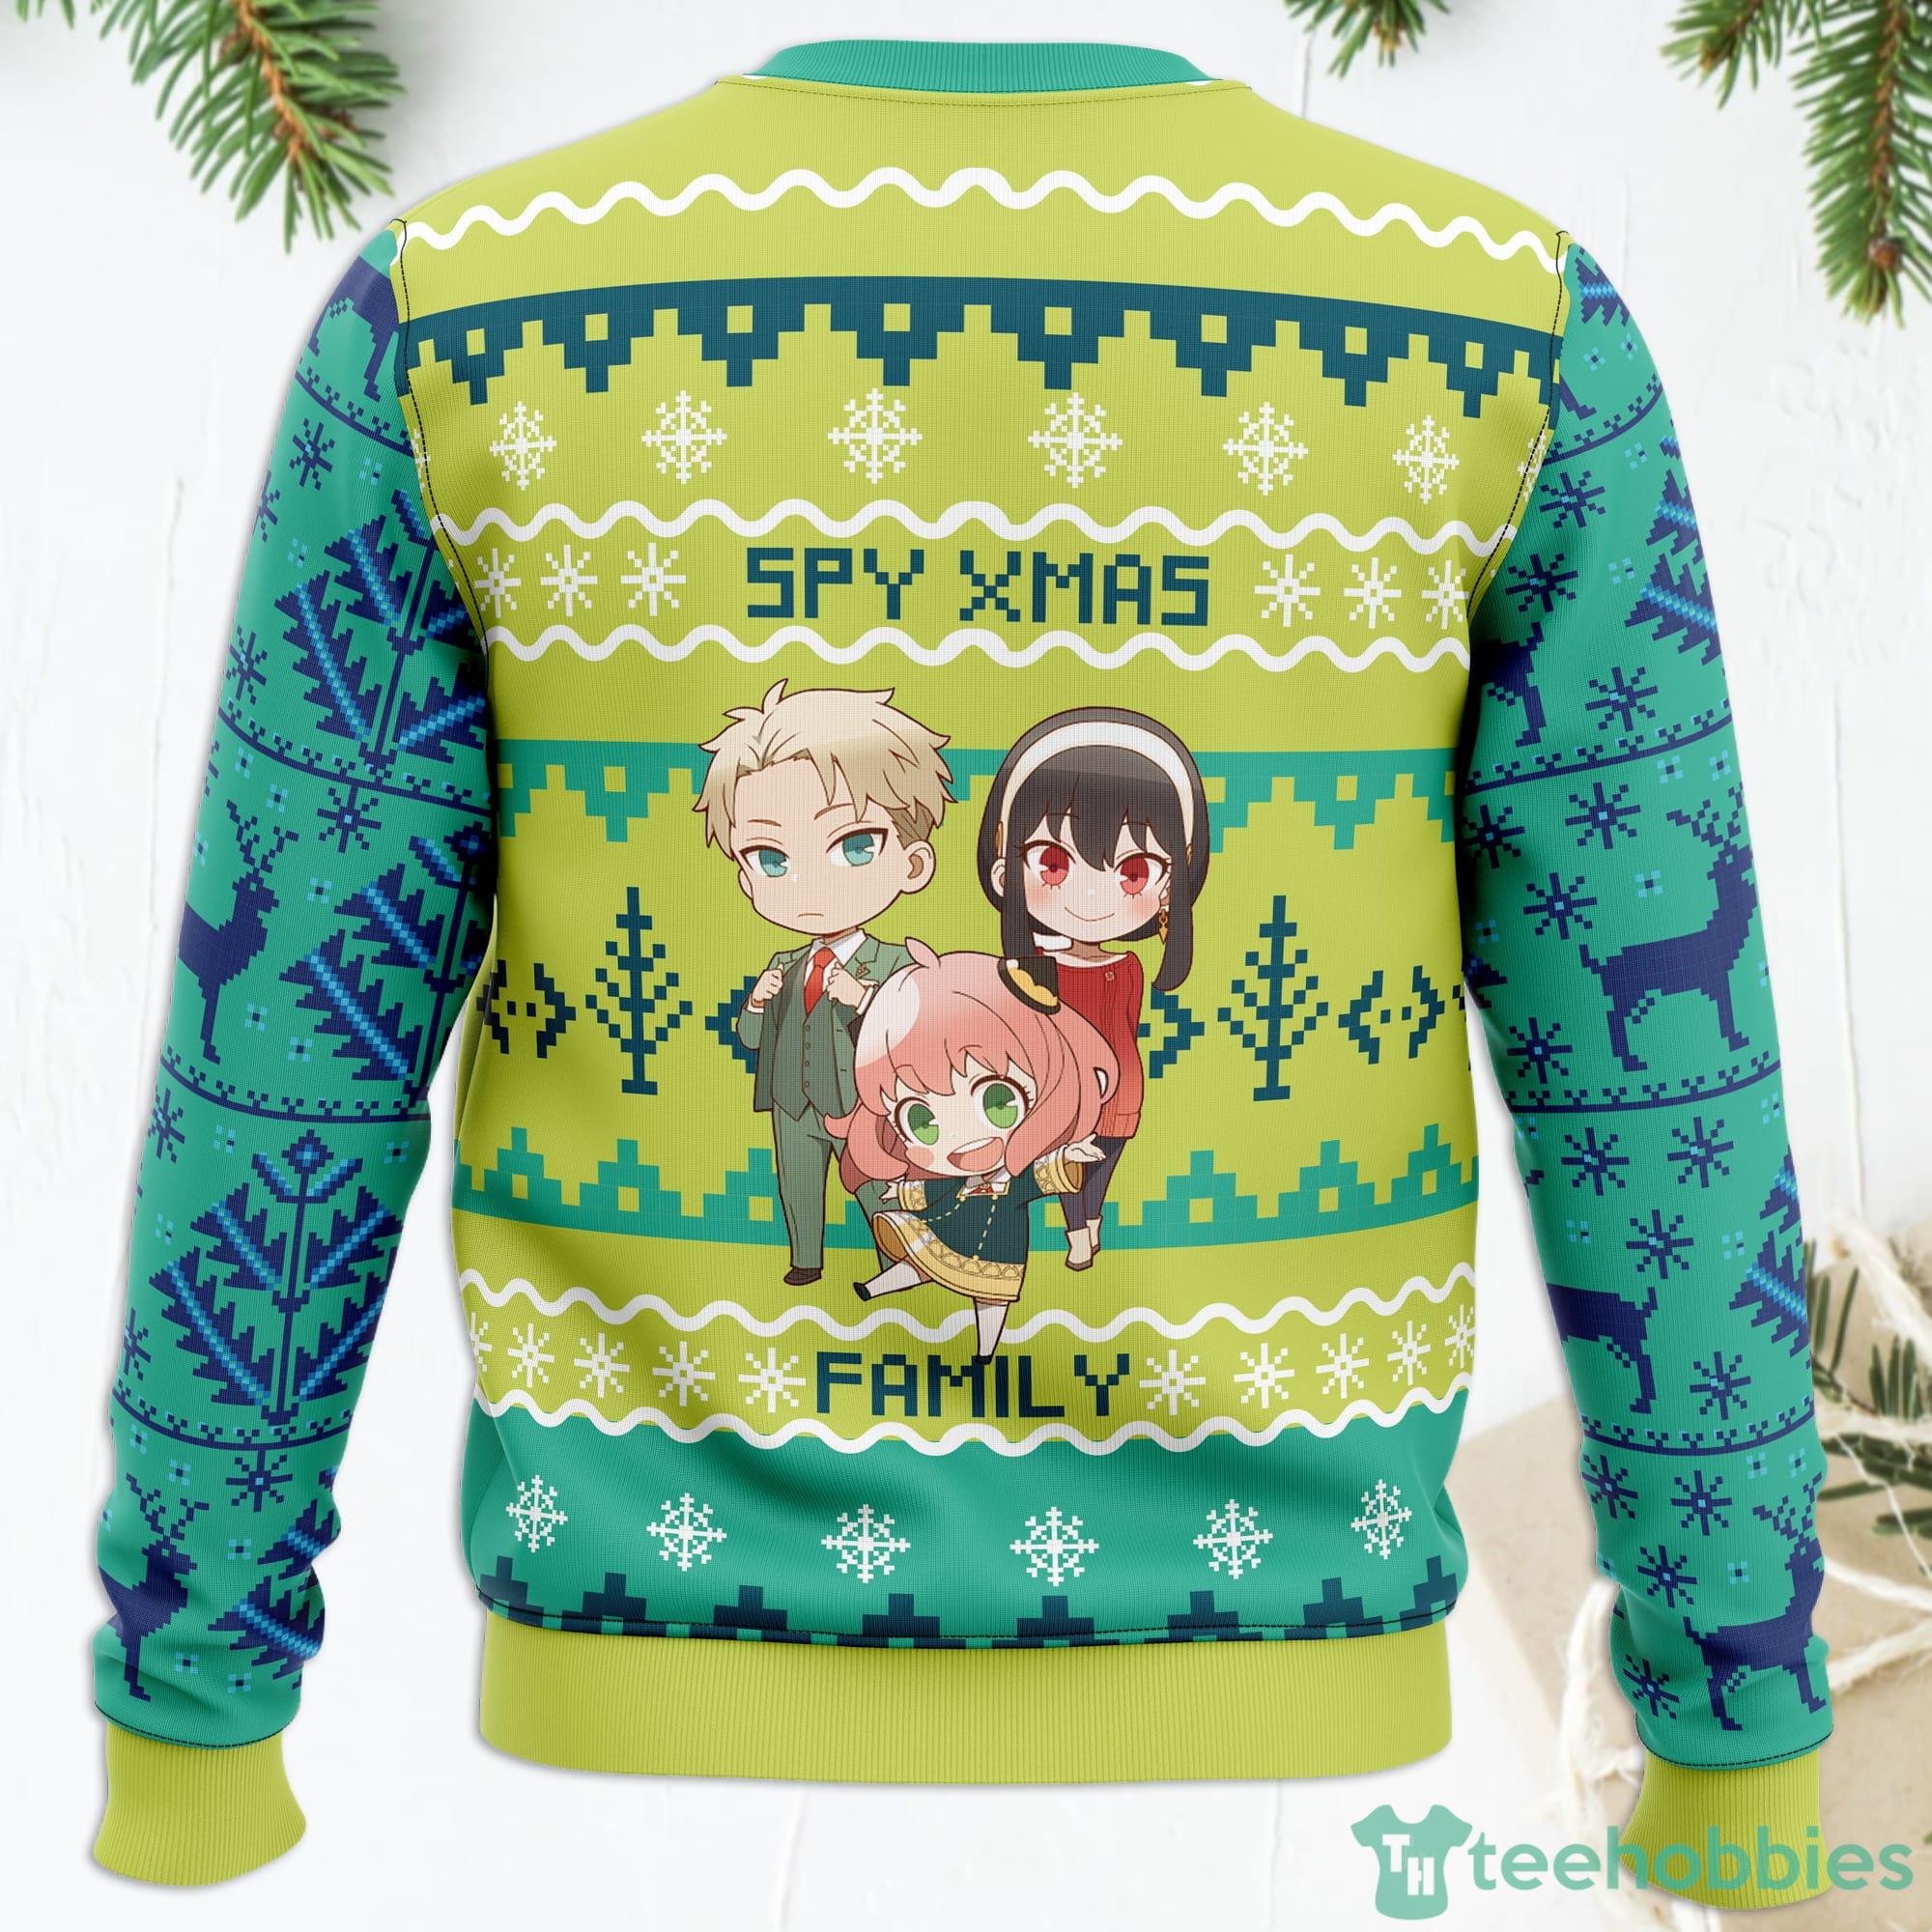 Santa One Piece Characters Chibi Merry Christmas shirt, hoodie, sweater,  long sleeve and tank top